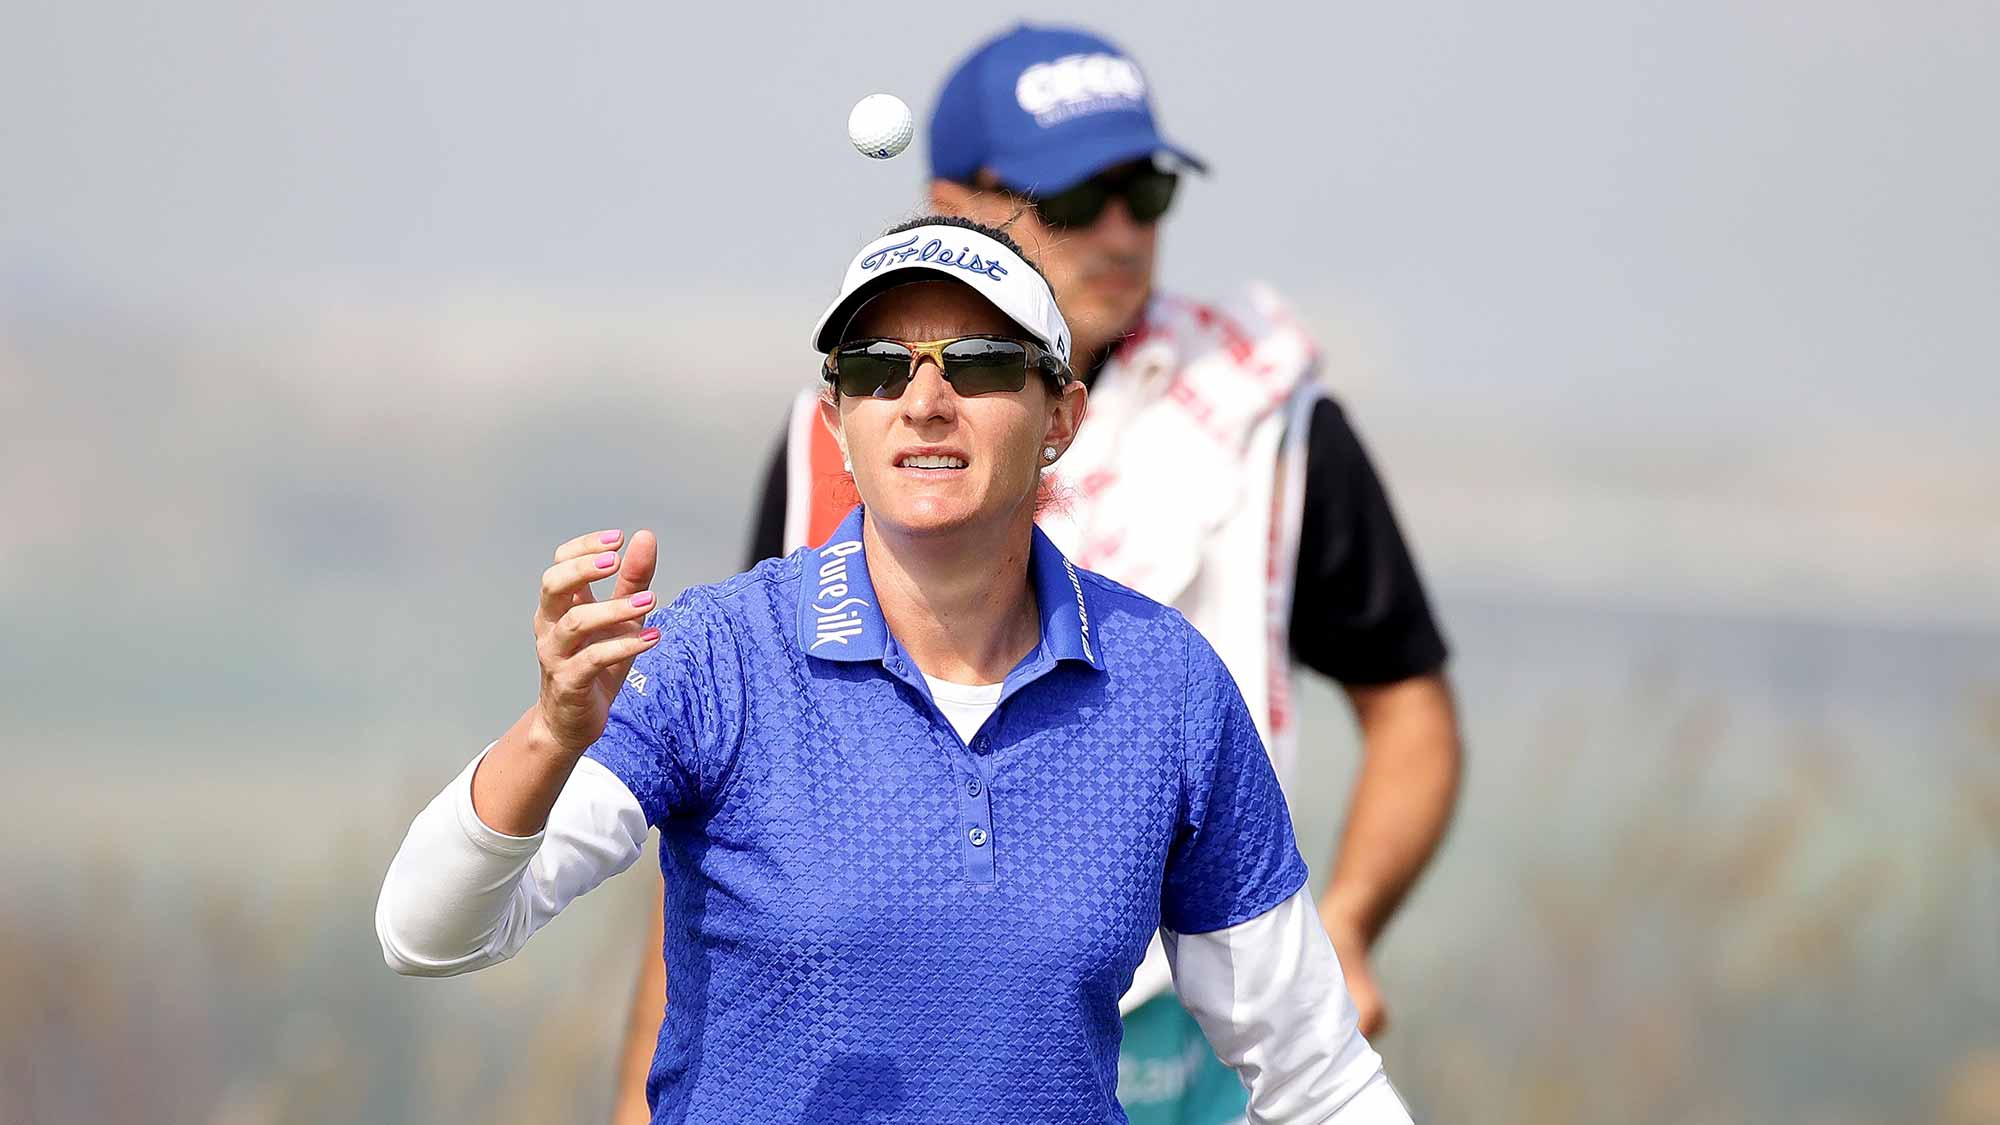 Brittany Lang of United States reacts after a putt on the 6th green during the third round of the LPGA KEB-Hana Bank Championship at the Sky 72 Golf Club Ocean Course